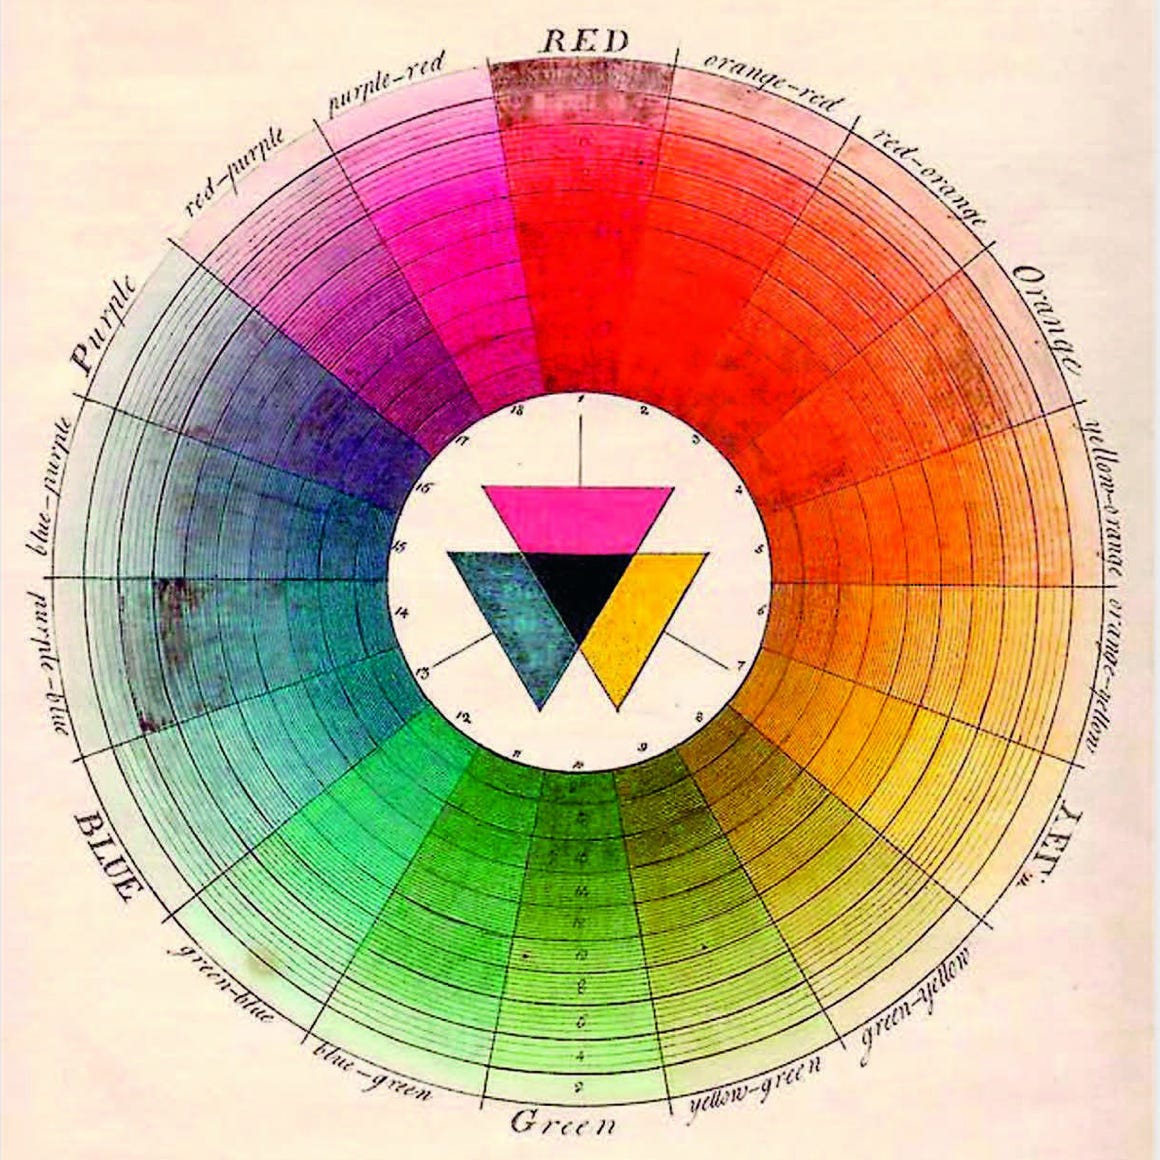 Creative Basics — Color Theory. Intro to color theory